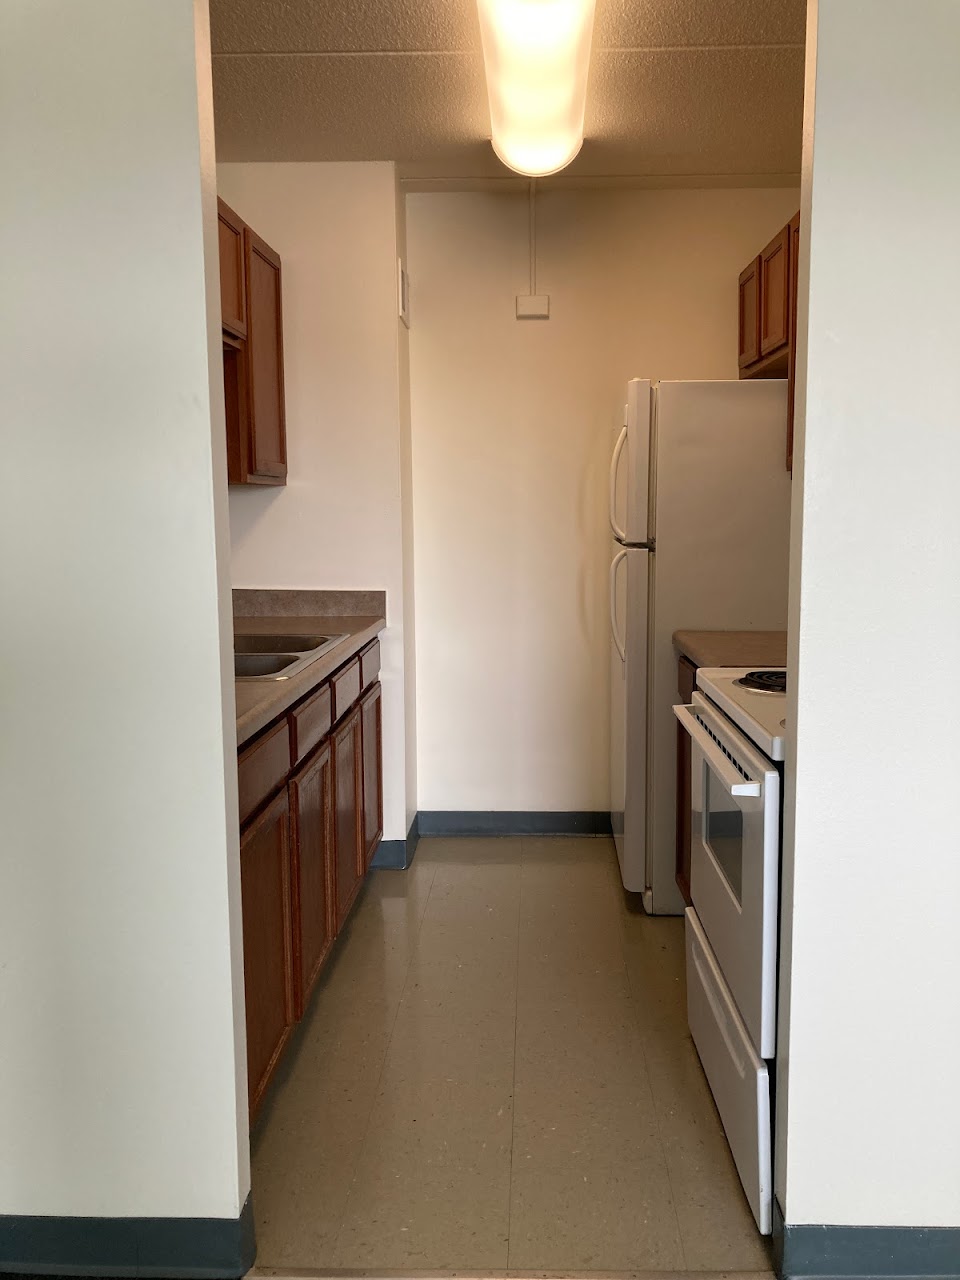 Photo of MONROE PLAZA. Affordable housing located at 400 N MONROE AVE GREEN BAY, WI 54301